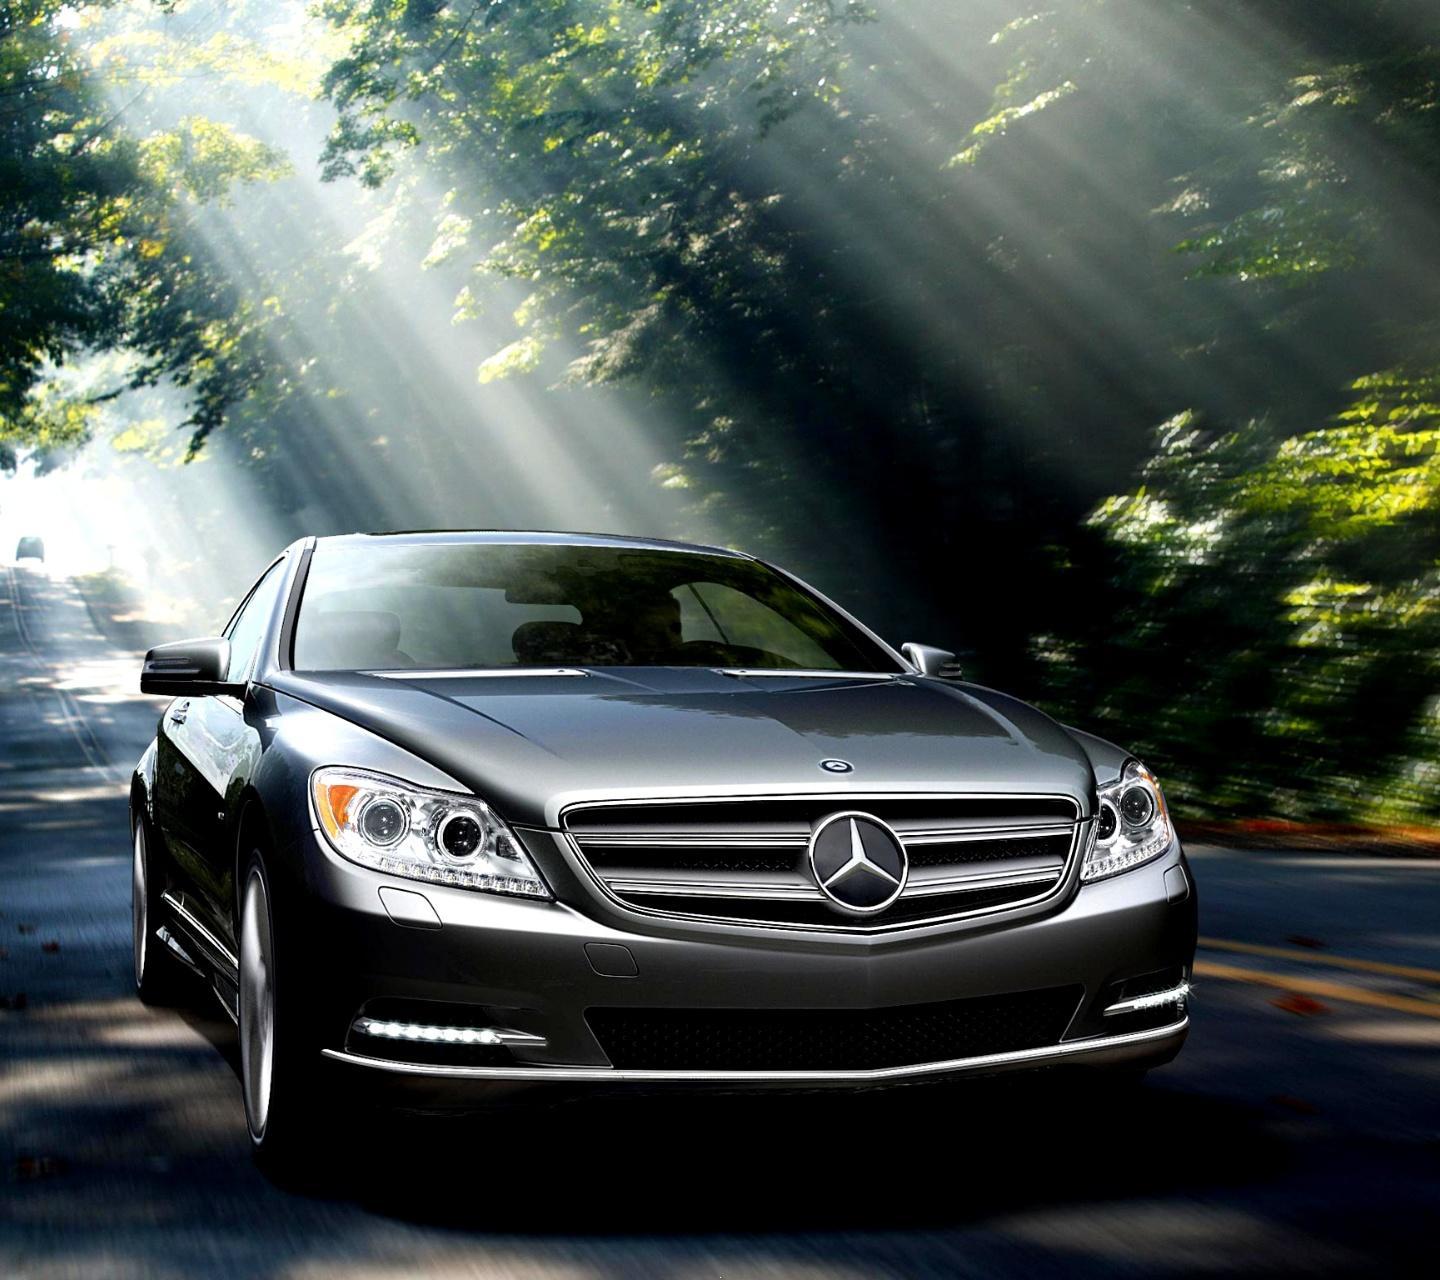 Download Mercedes benz - Cars wallpapers for your mobile cell phone